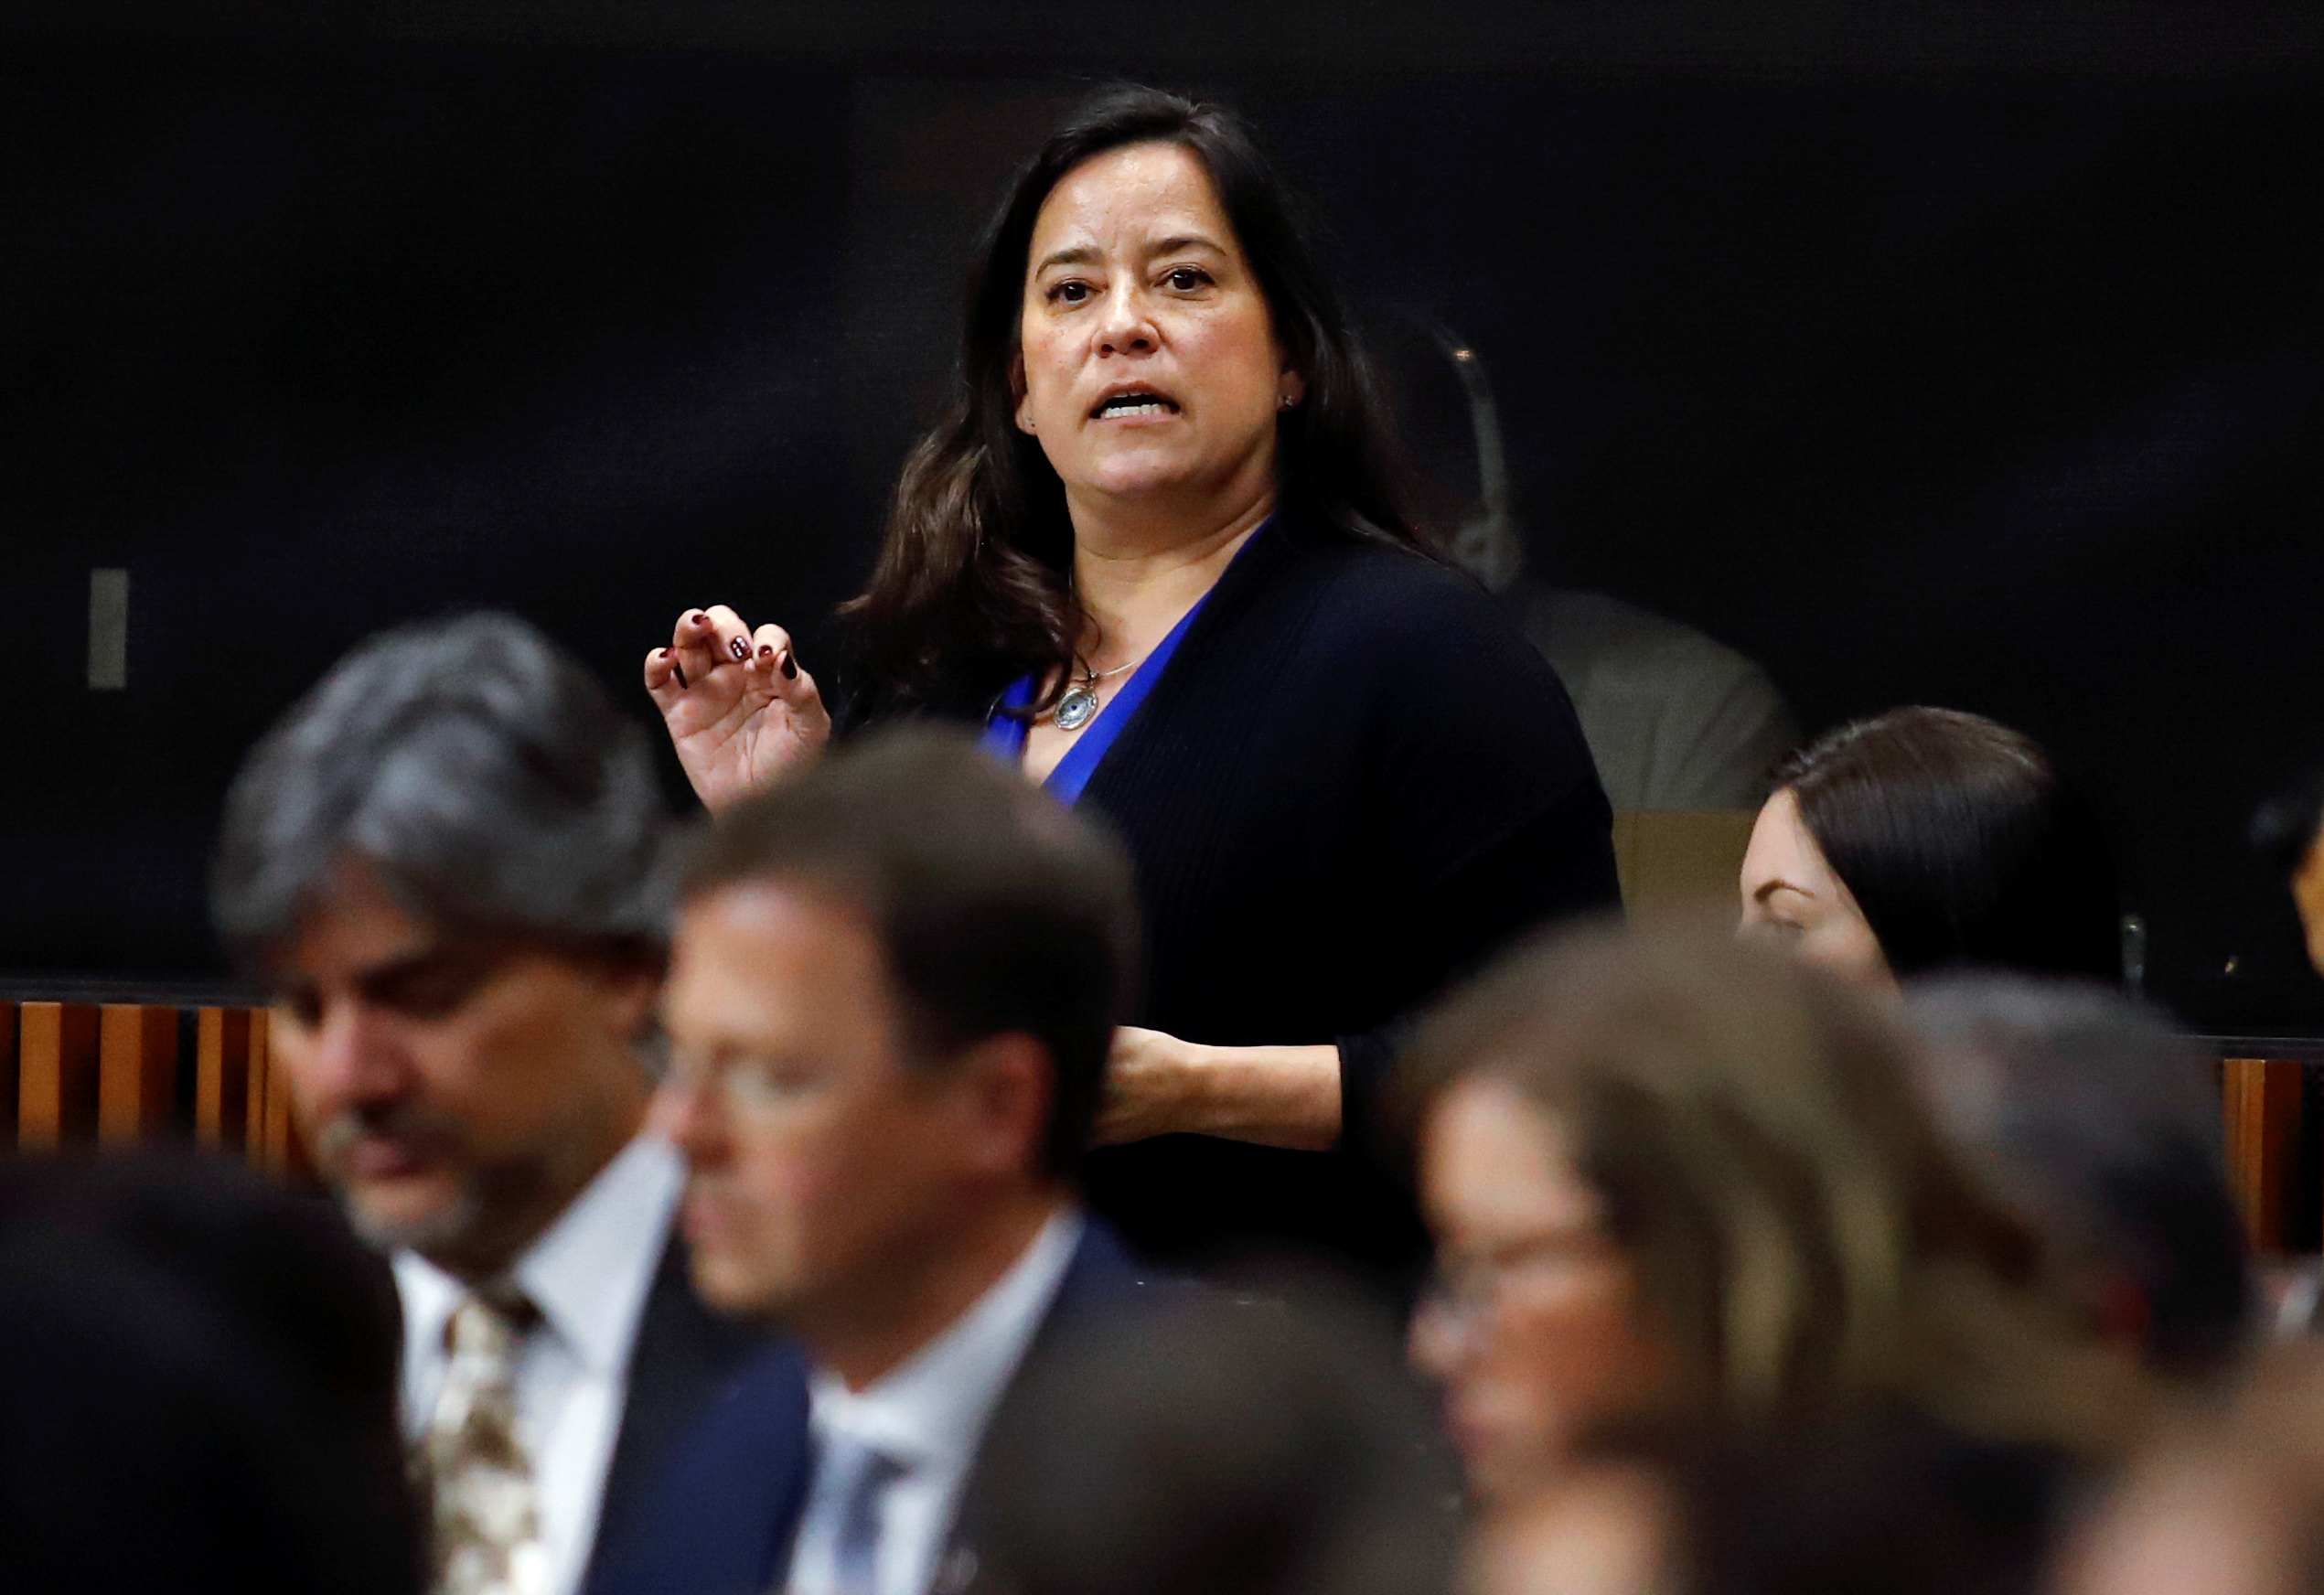 Former Canadian Justice Minister and current independent MP Jody Wilson-Raybould speaks in parliament during Question Period in Ottawa